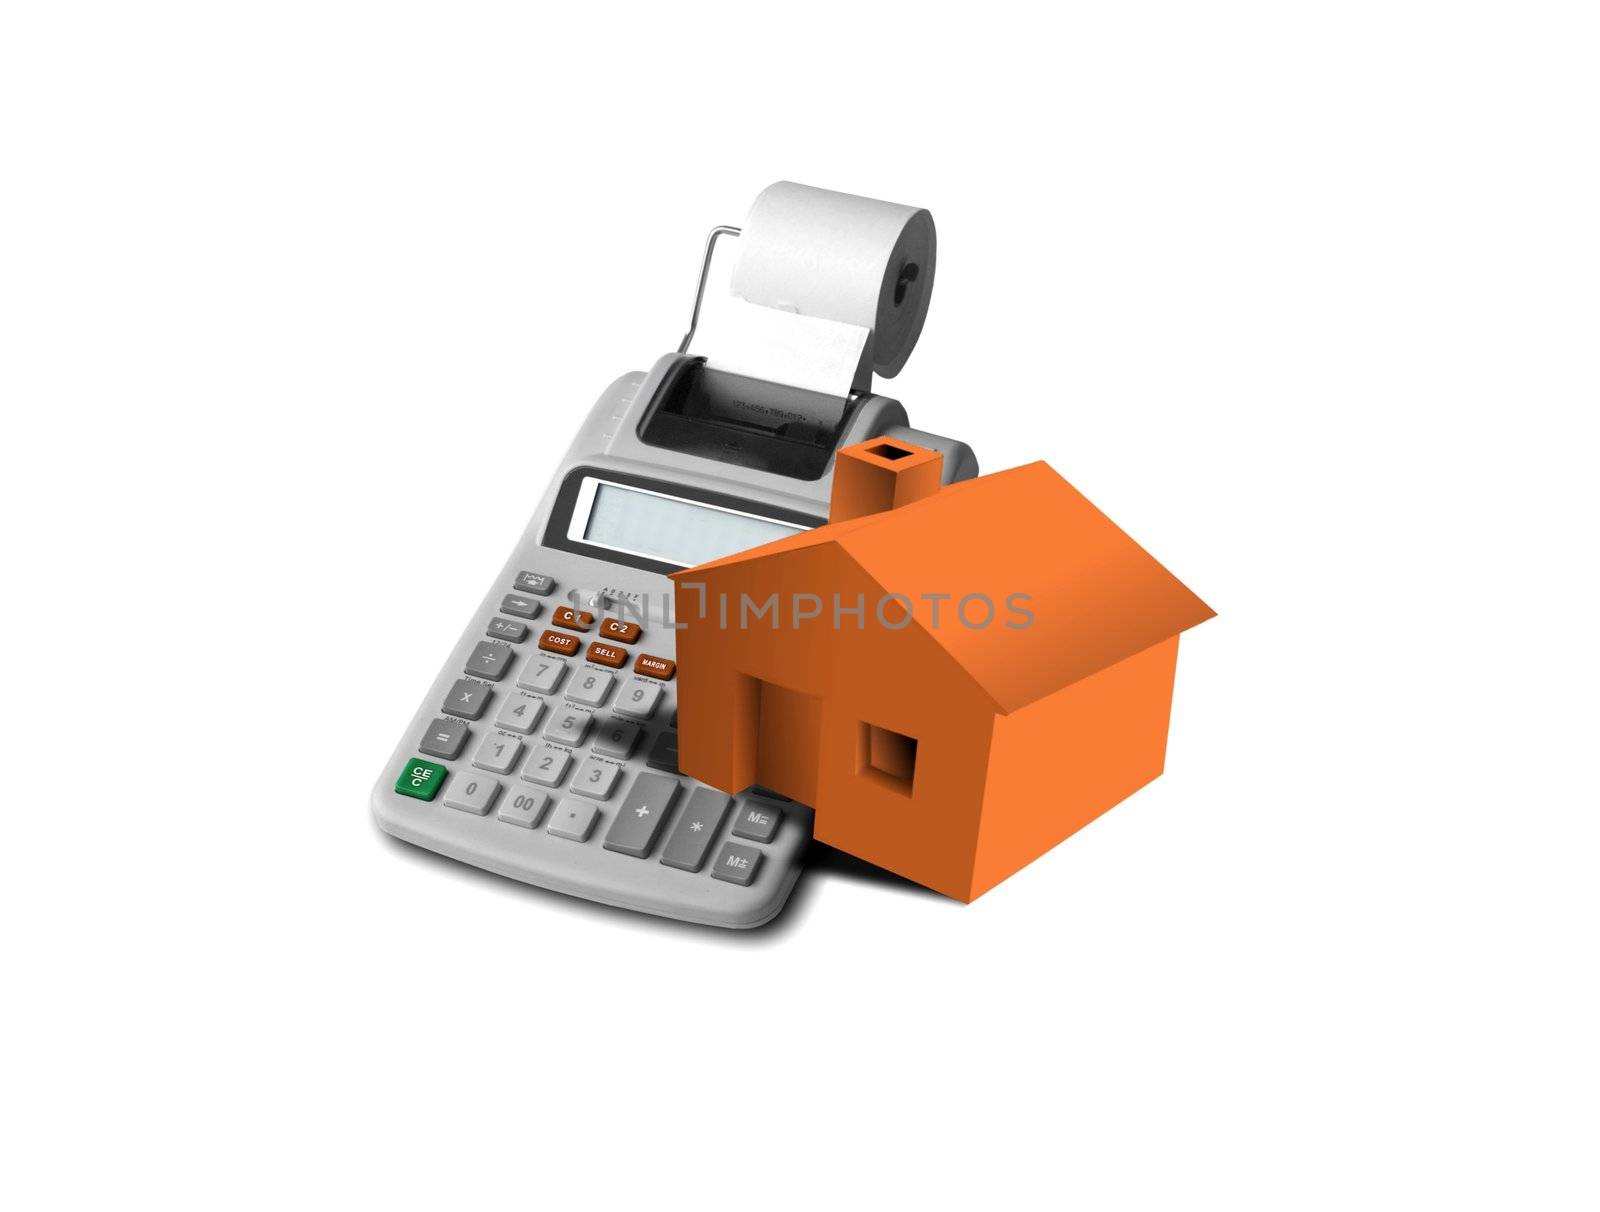 Image of monopoly house and calculator